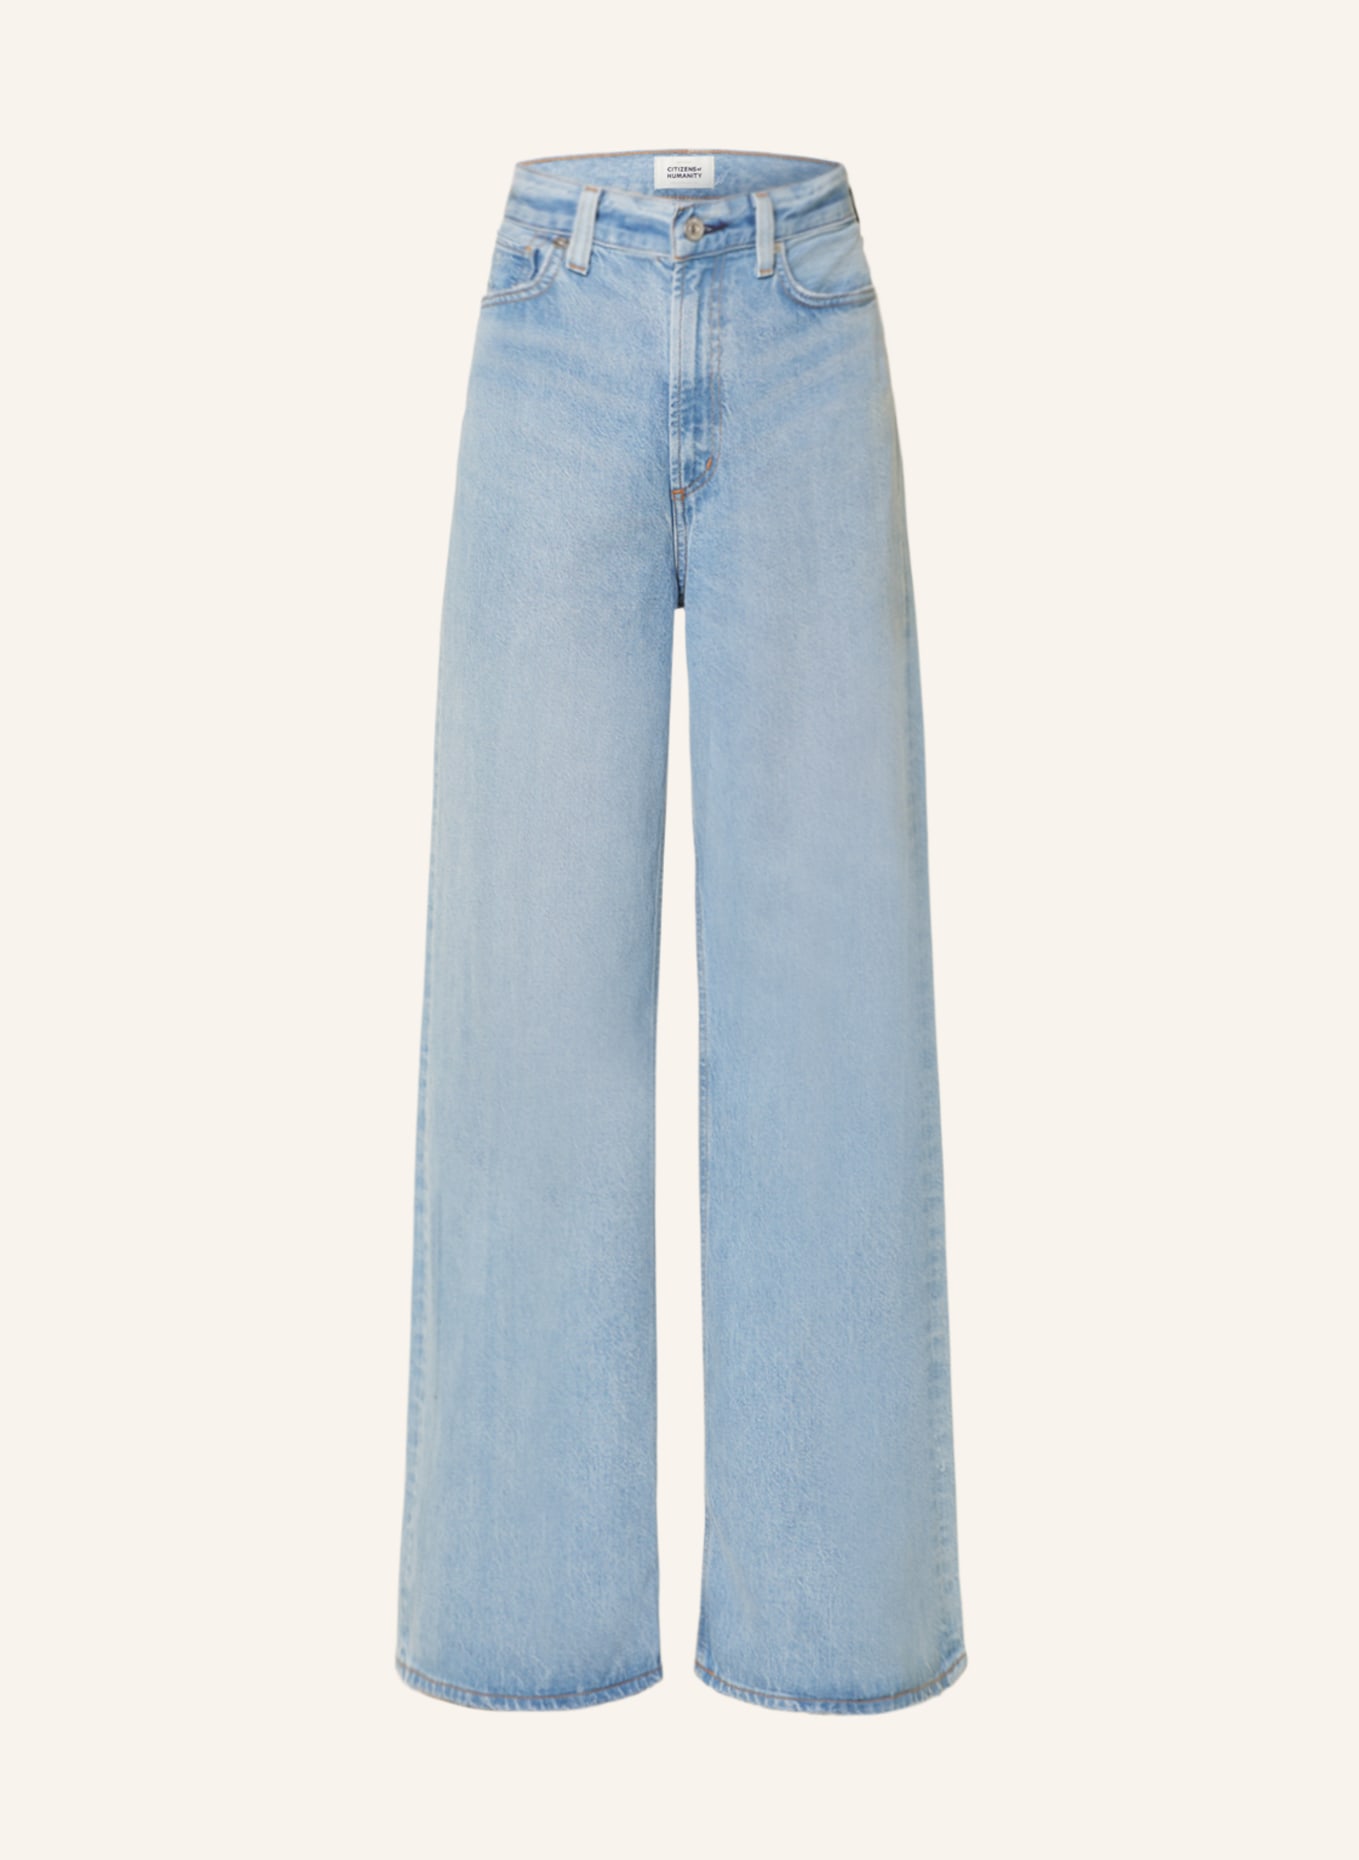 CITIZENS of HUMANITY Jeans PALOMA, Color: Alemayde lt ind (Image 1)